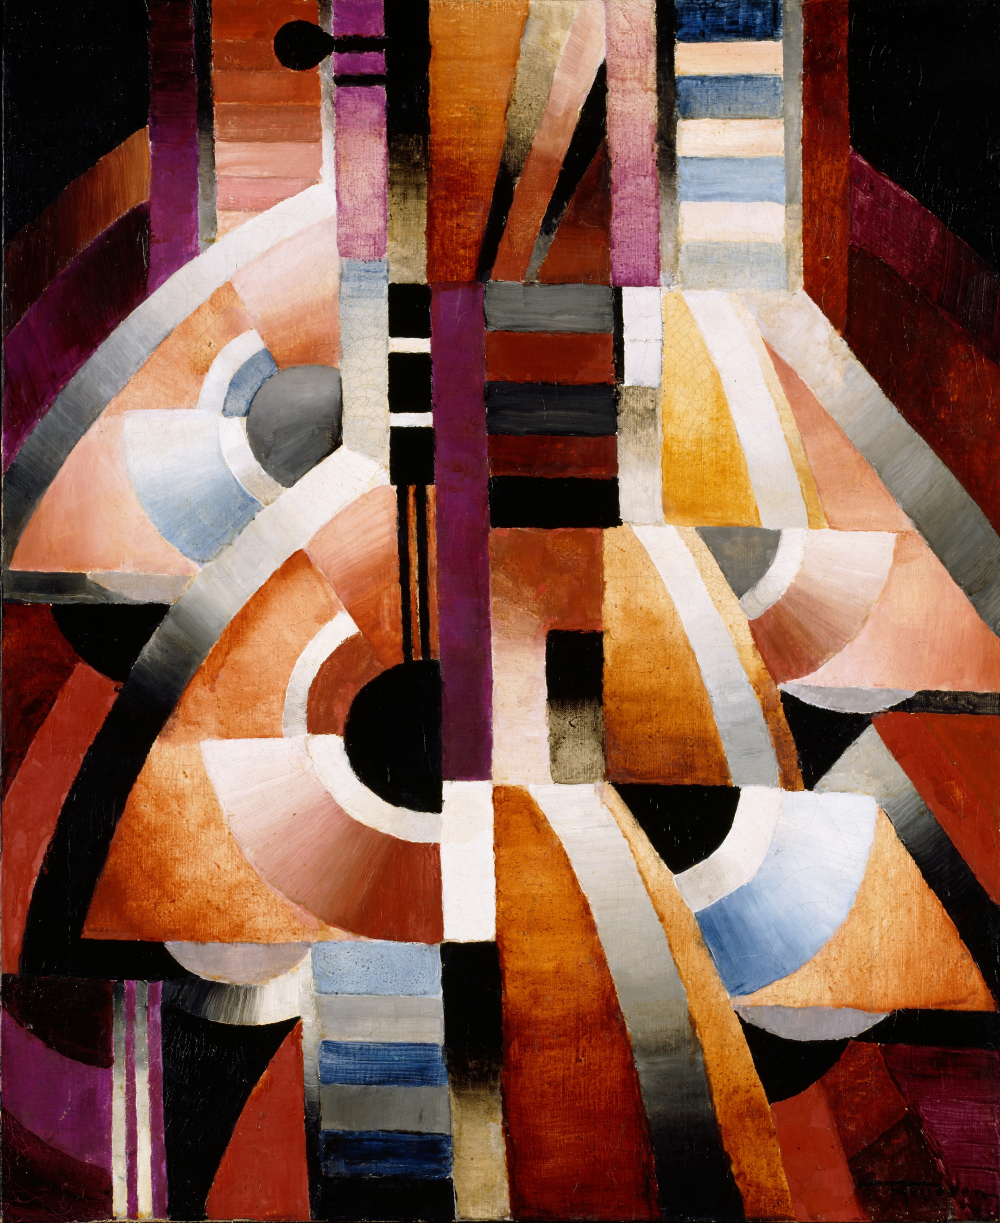 Norway’s First Cubist Painter